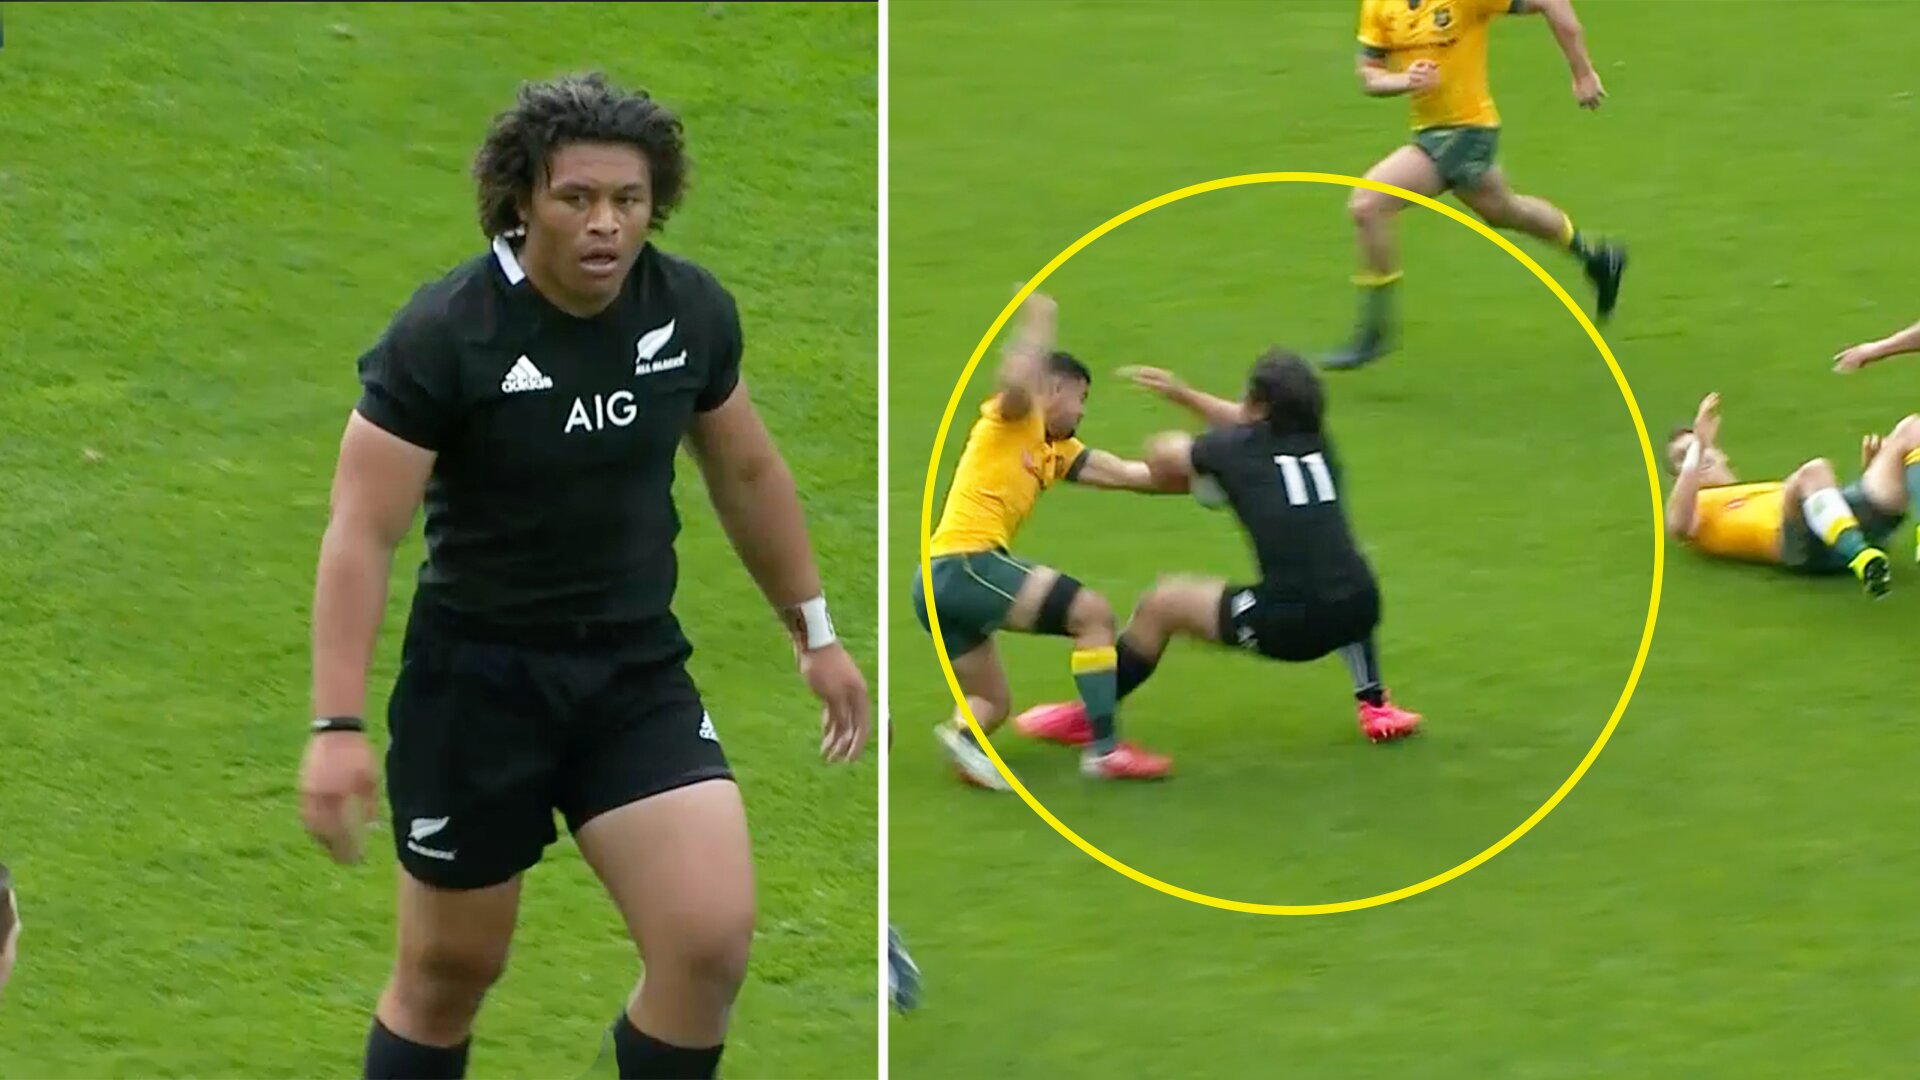 Fans are raving about 'the new Jonah Lomu' in Caleb Clarke as he terrorises the Wallabies at Eden Park